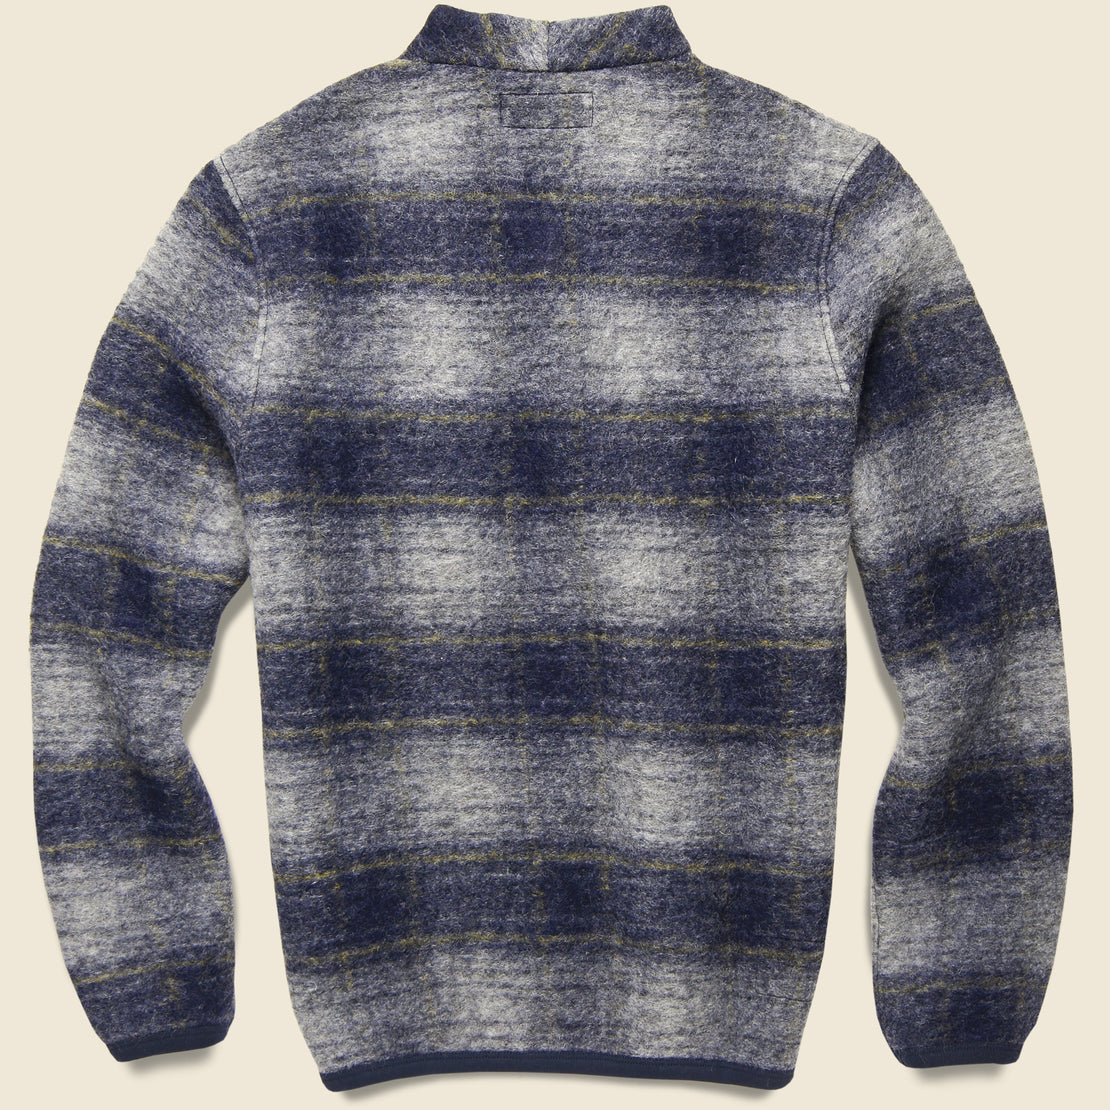 Wool Fleece Cardigan - Navy Austin Check - Universal Works - STAG Provisions - Tops - Sweater